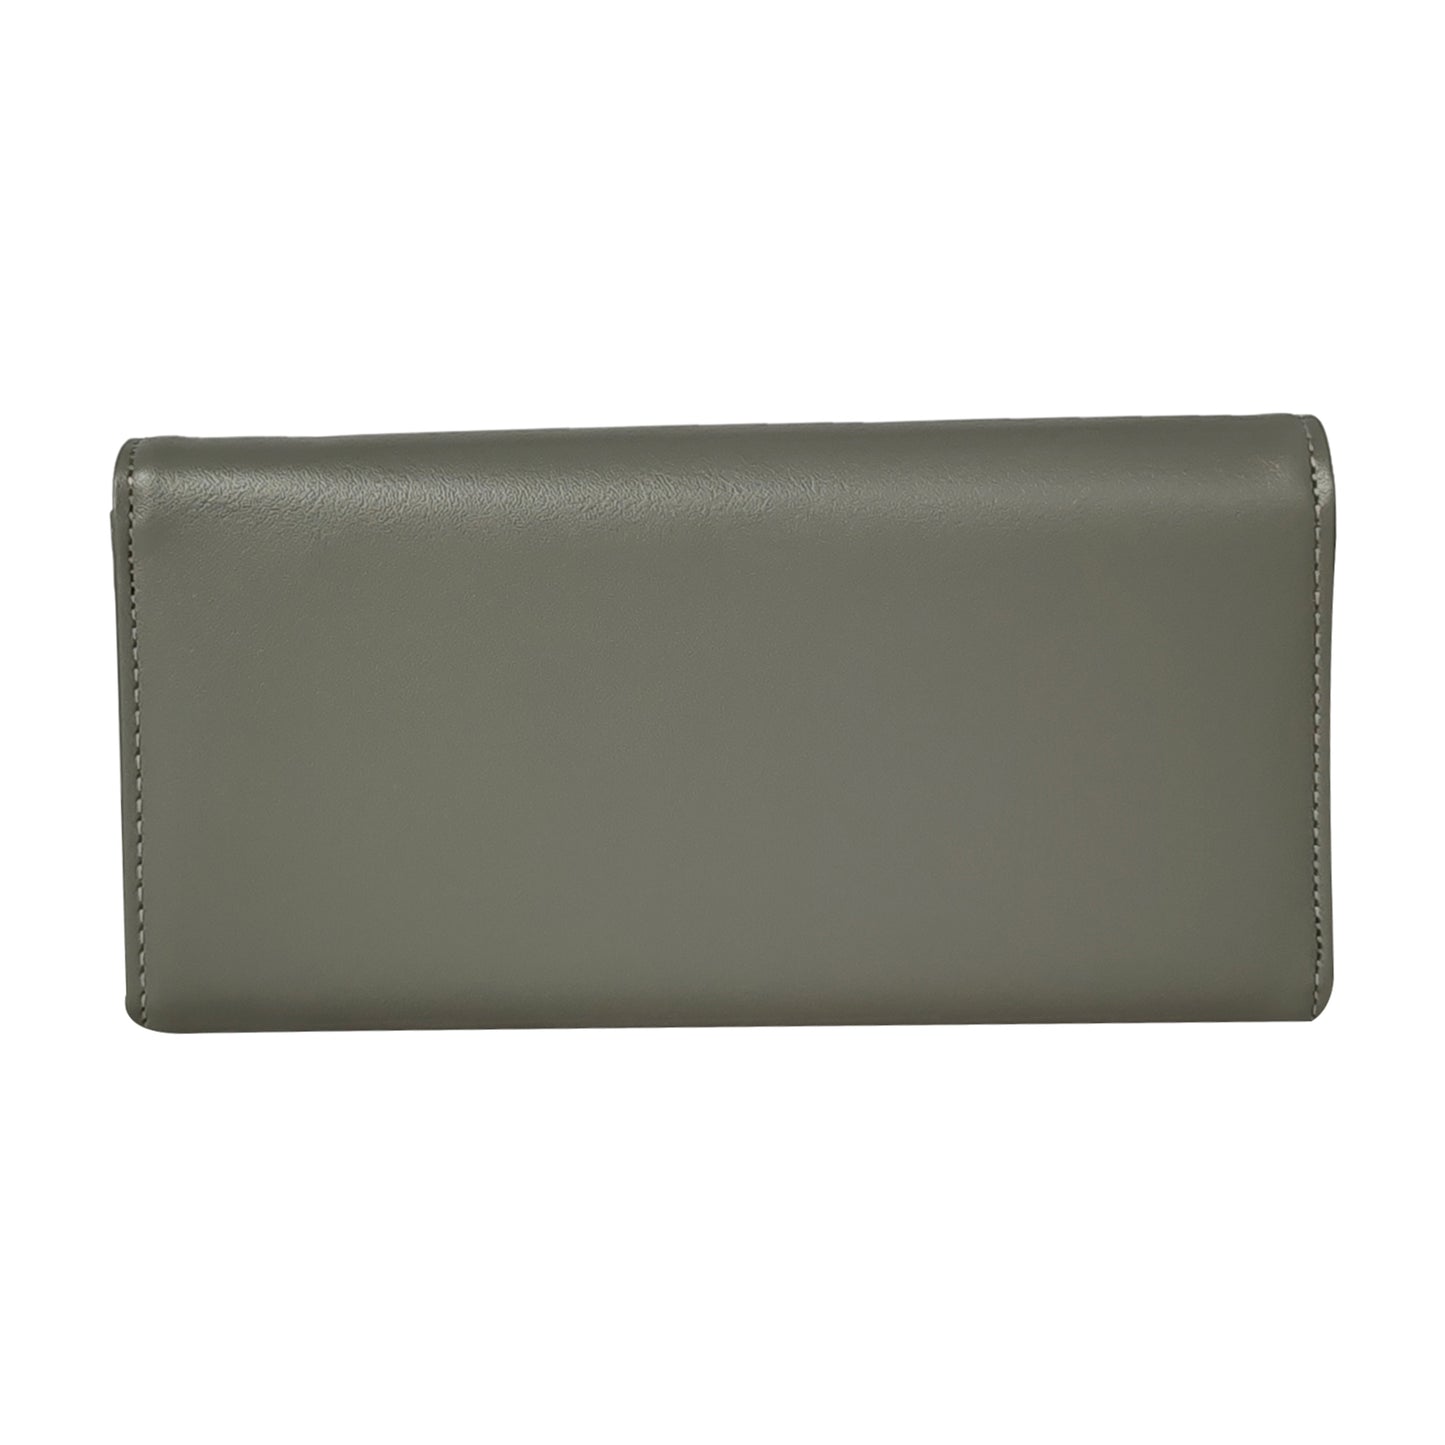 Justbags Women's Classic Style Faux Leather Wallet - Grey